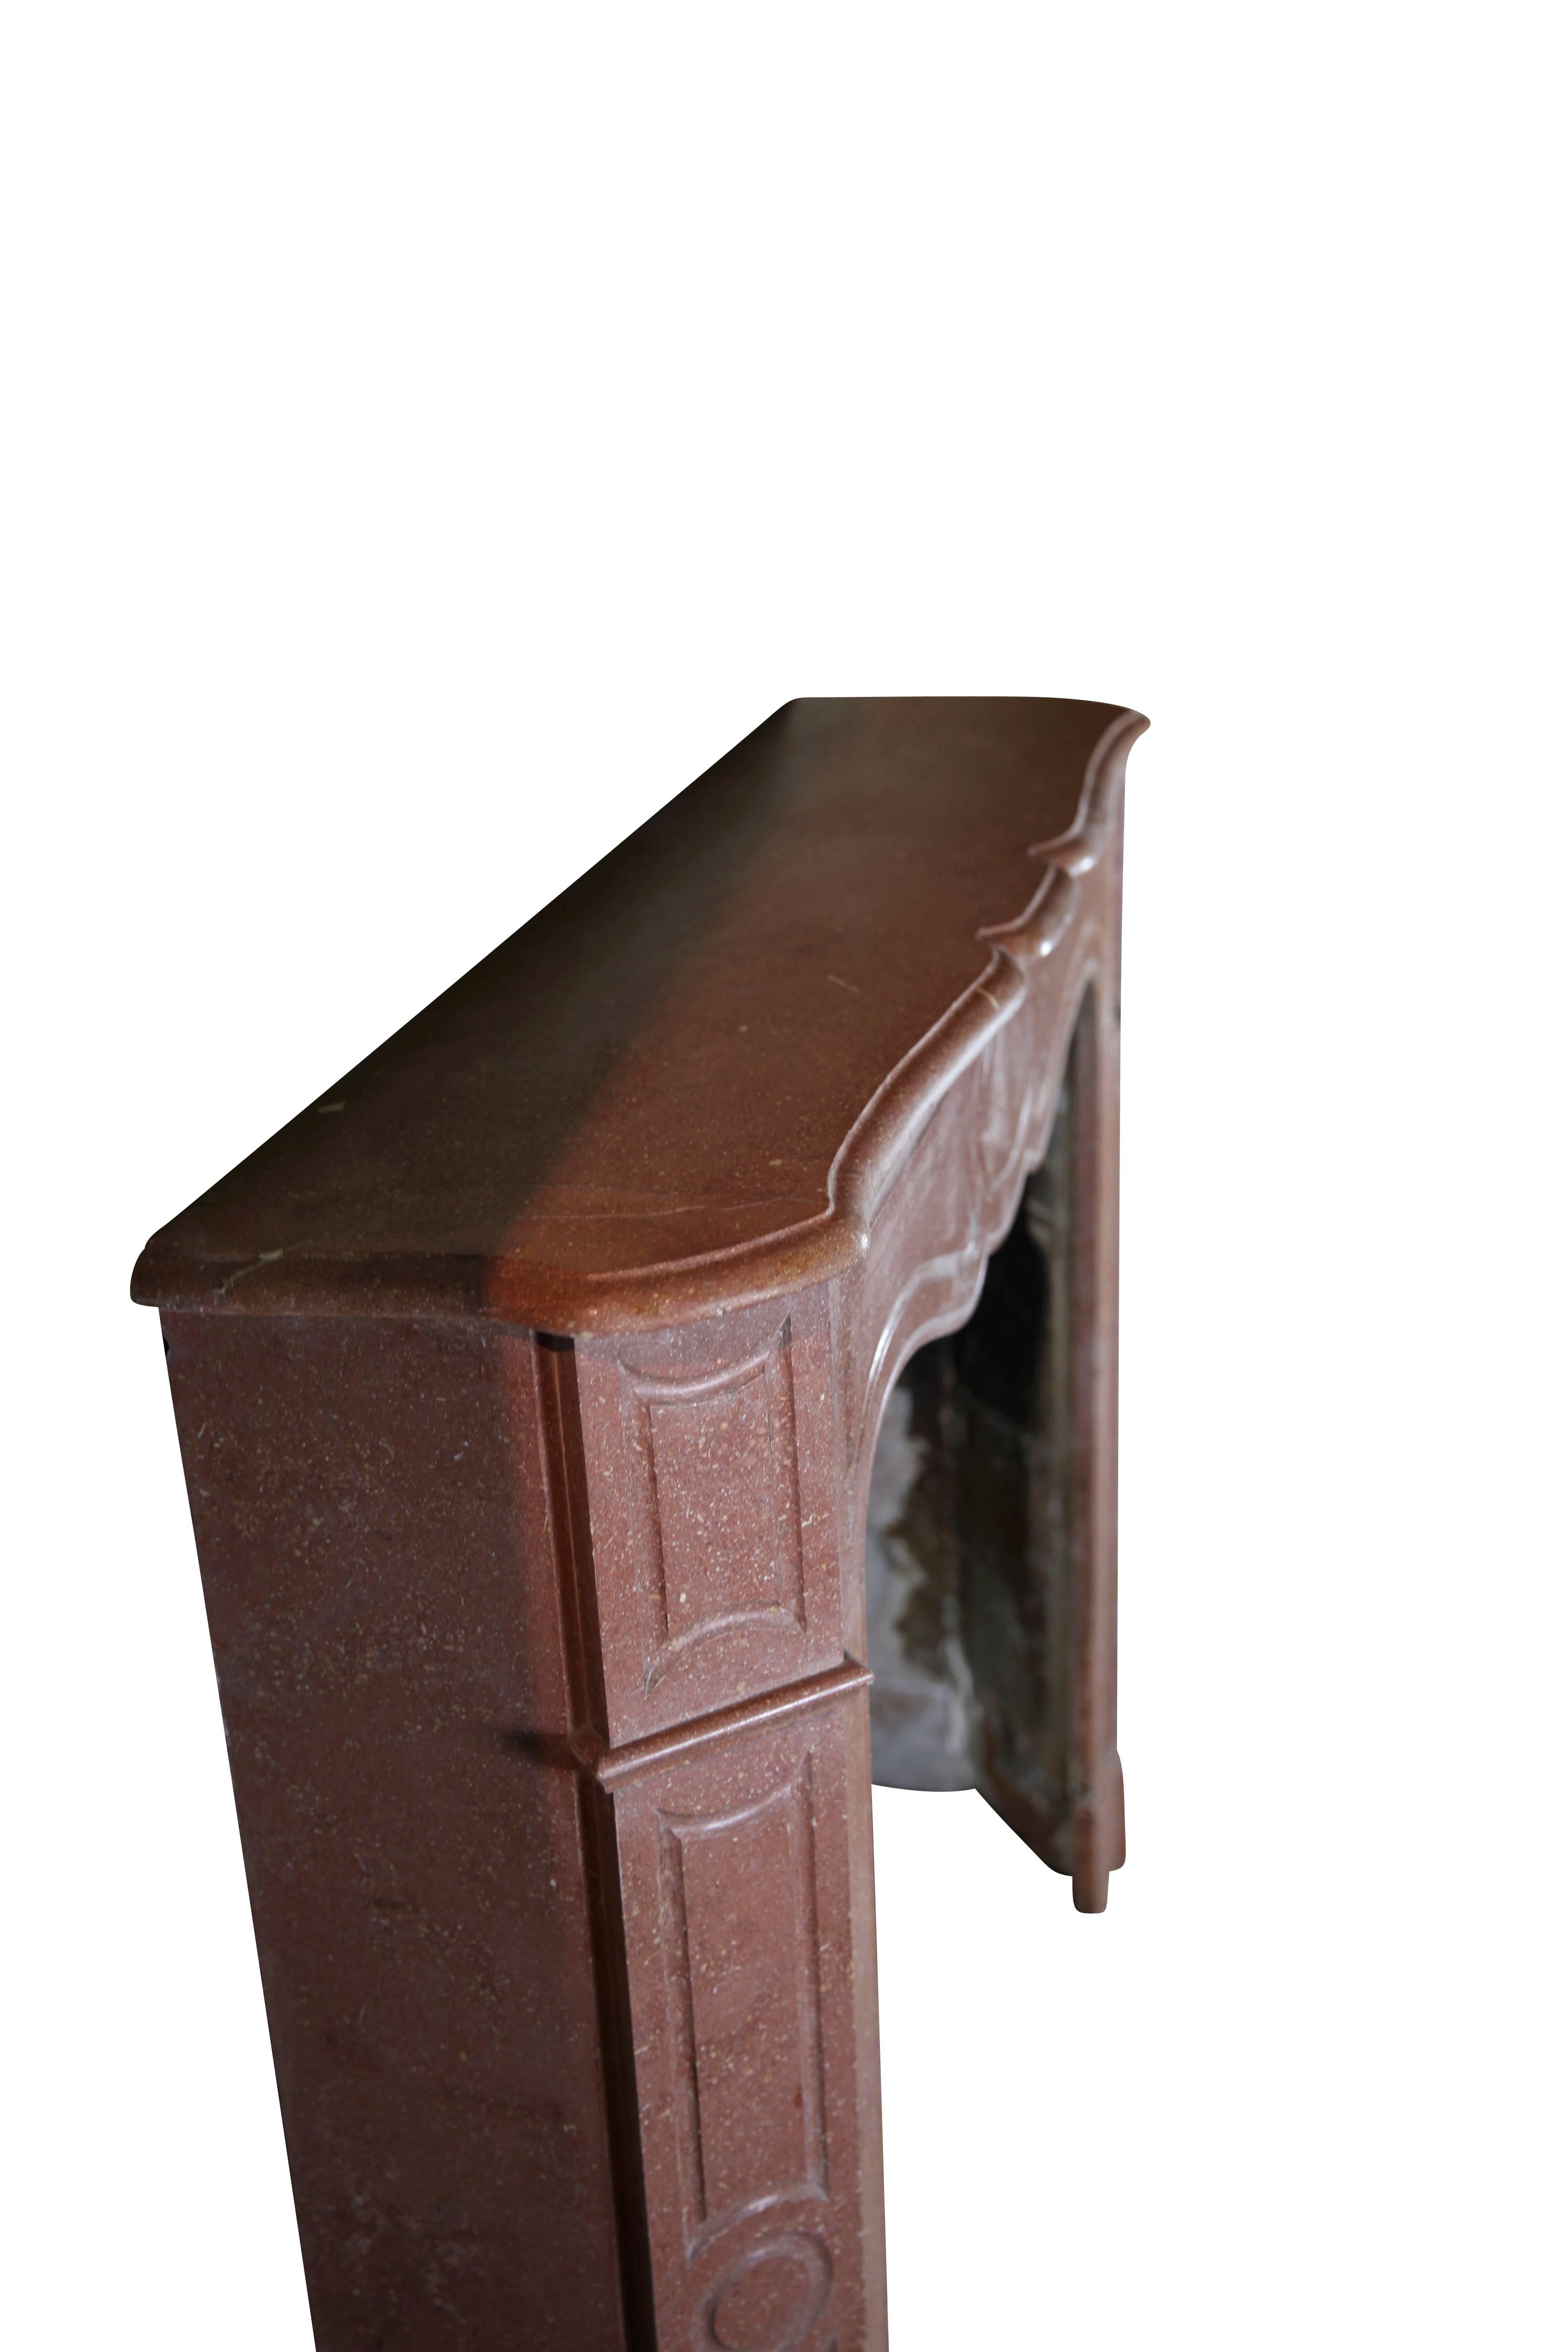 19th Century French Classic Petite Pompadour Marble Fireplace Surround For Sale 1